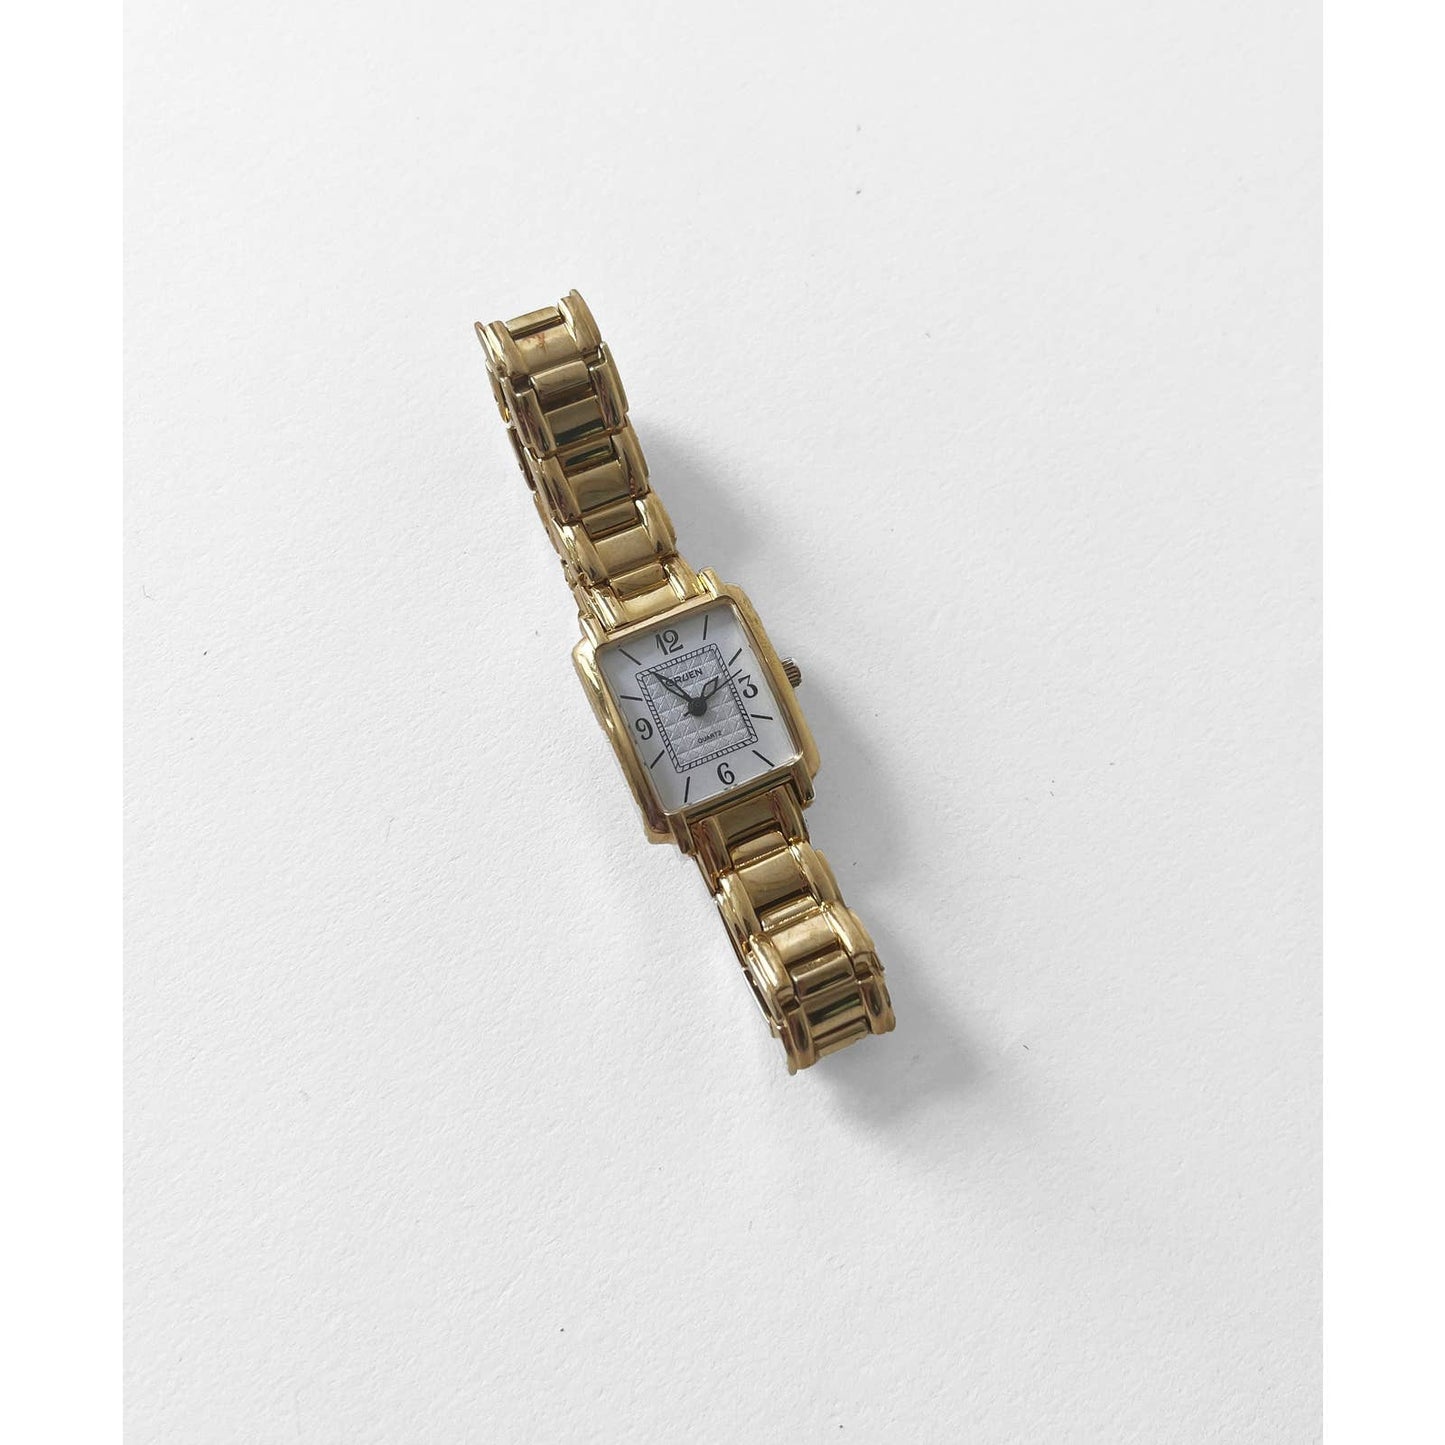 Vintage Gold Watch with Pearl Face | Gruen